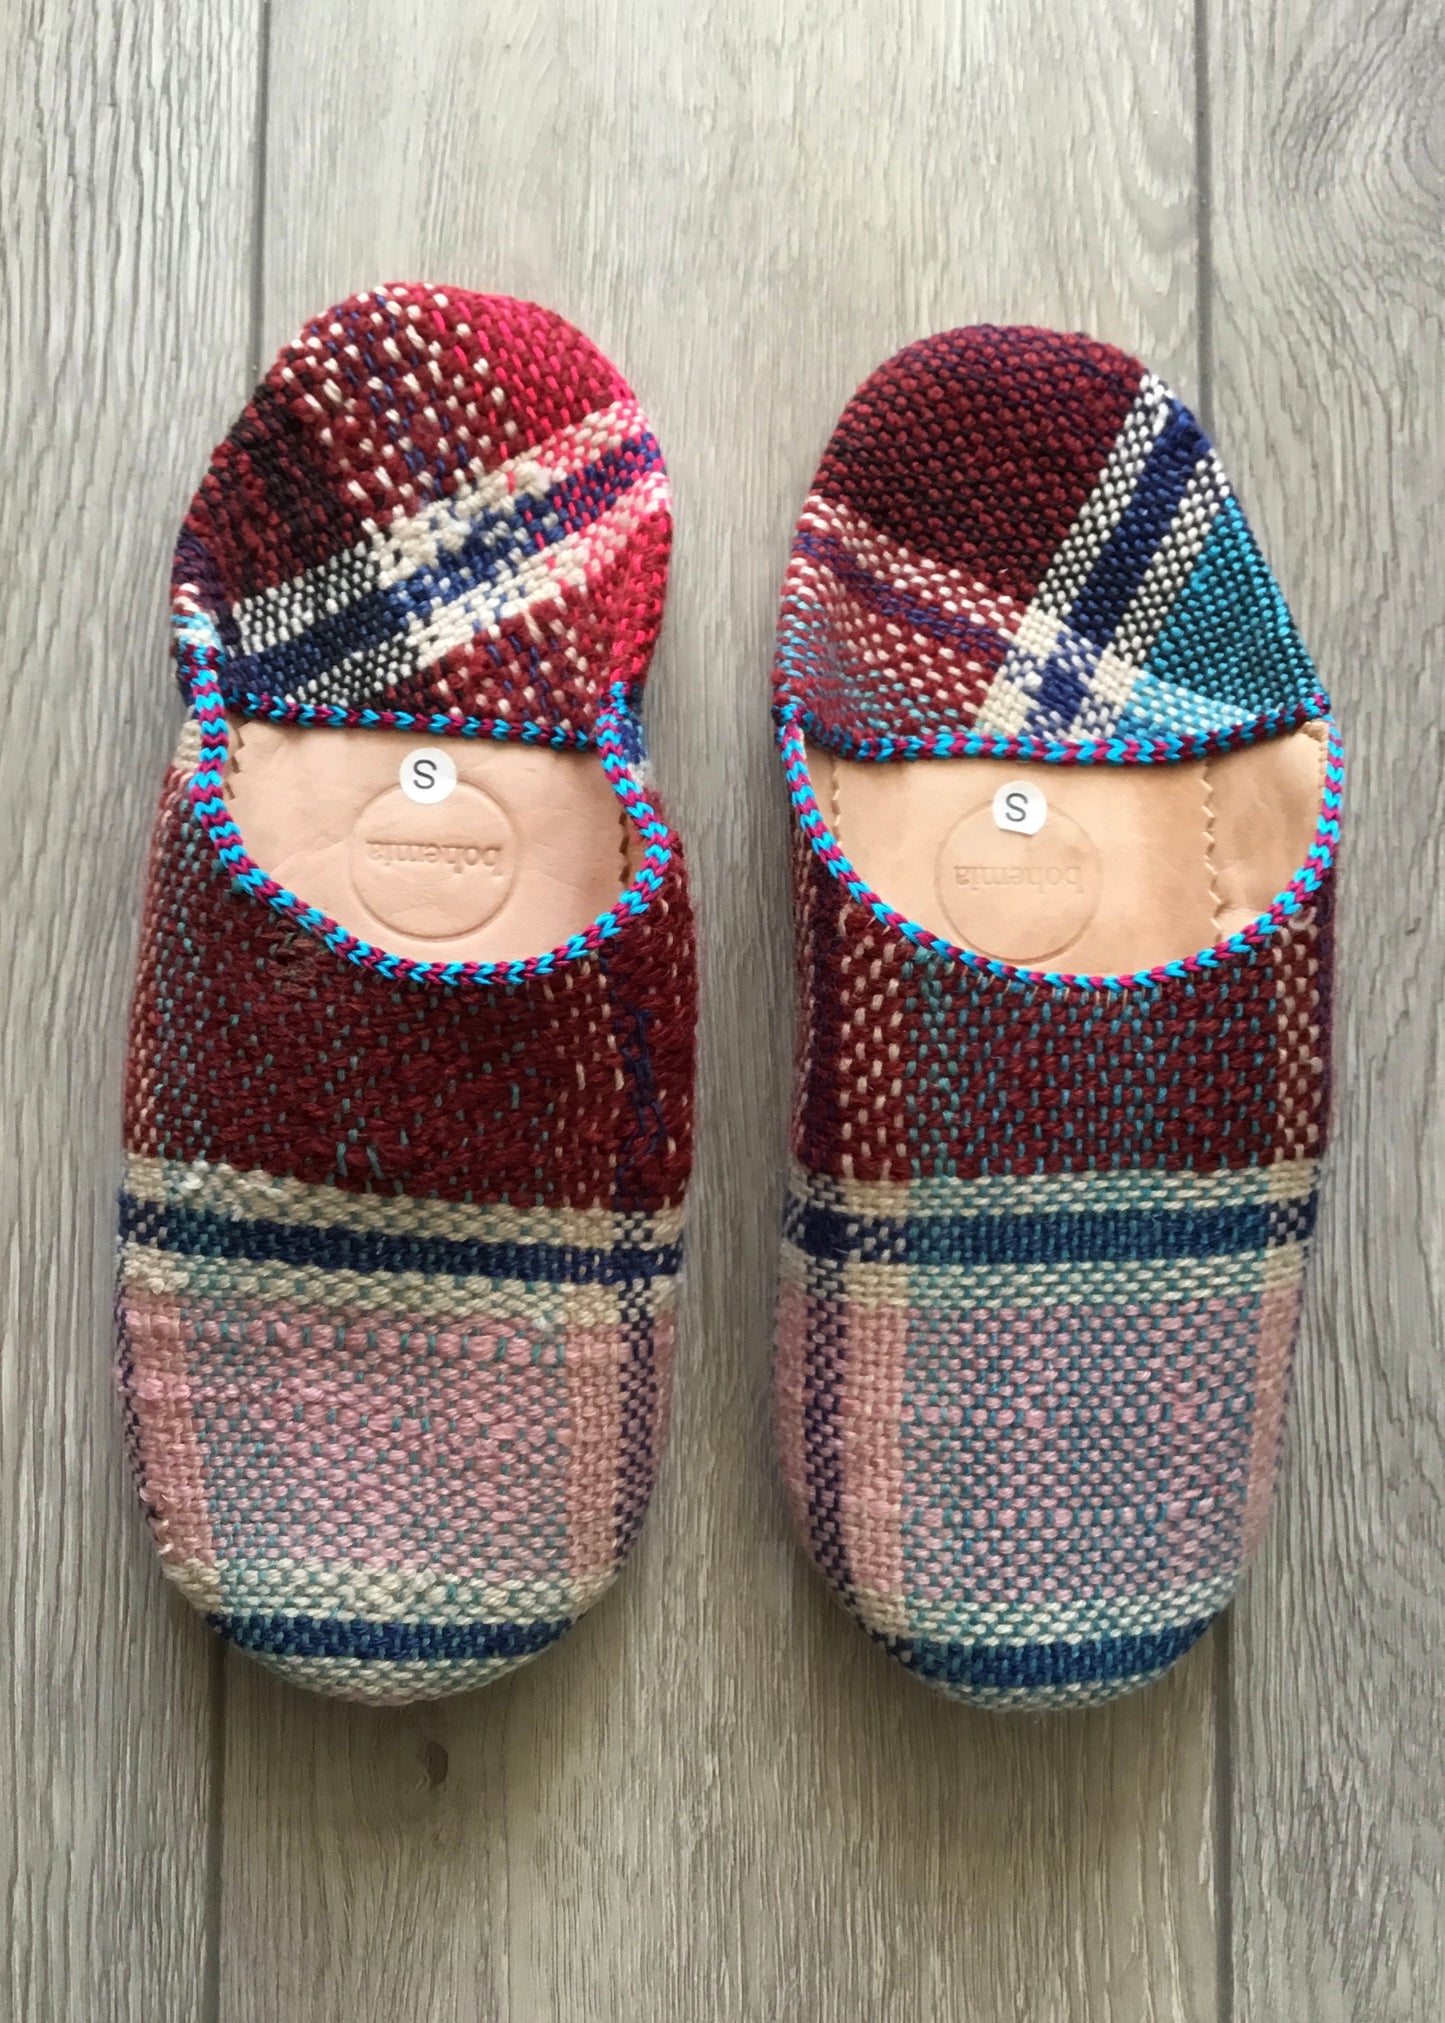 Bohemia Design - Moroccan Boujad Babouche Rounded Slippers Blues